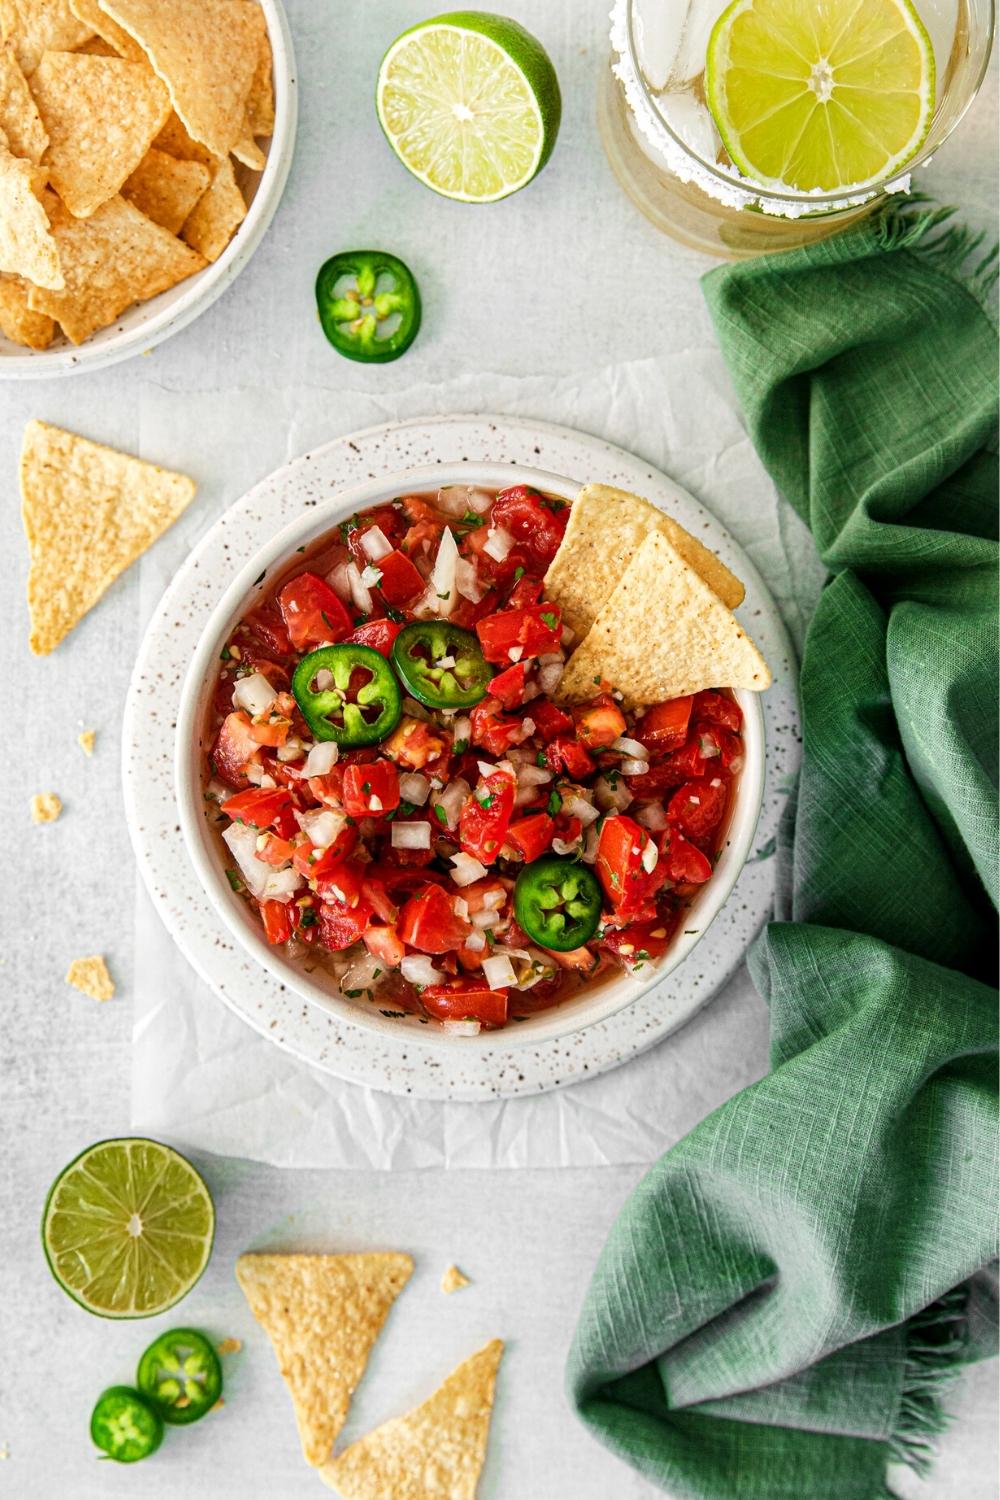 Authentic pico de gallo served in a bowl with restaurant-style tortilla chips.